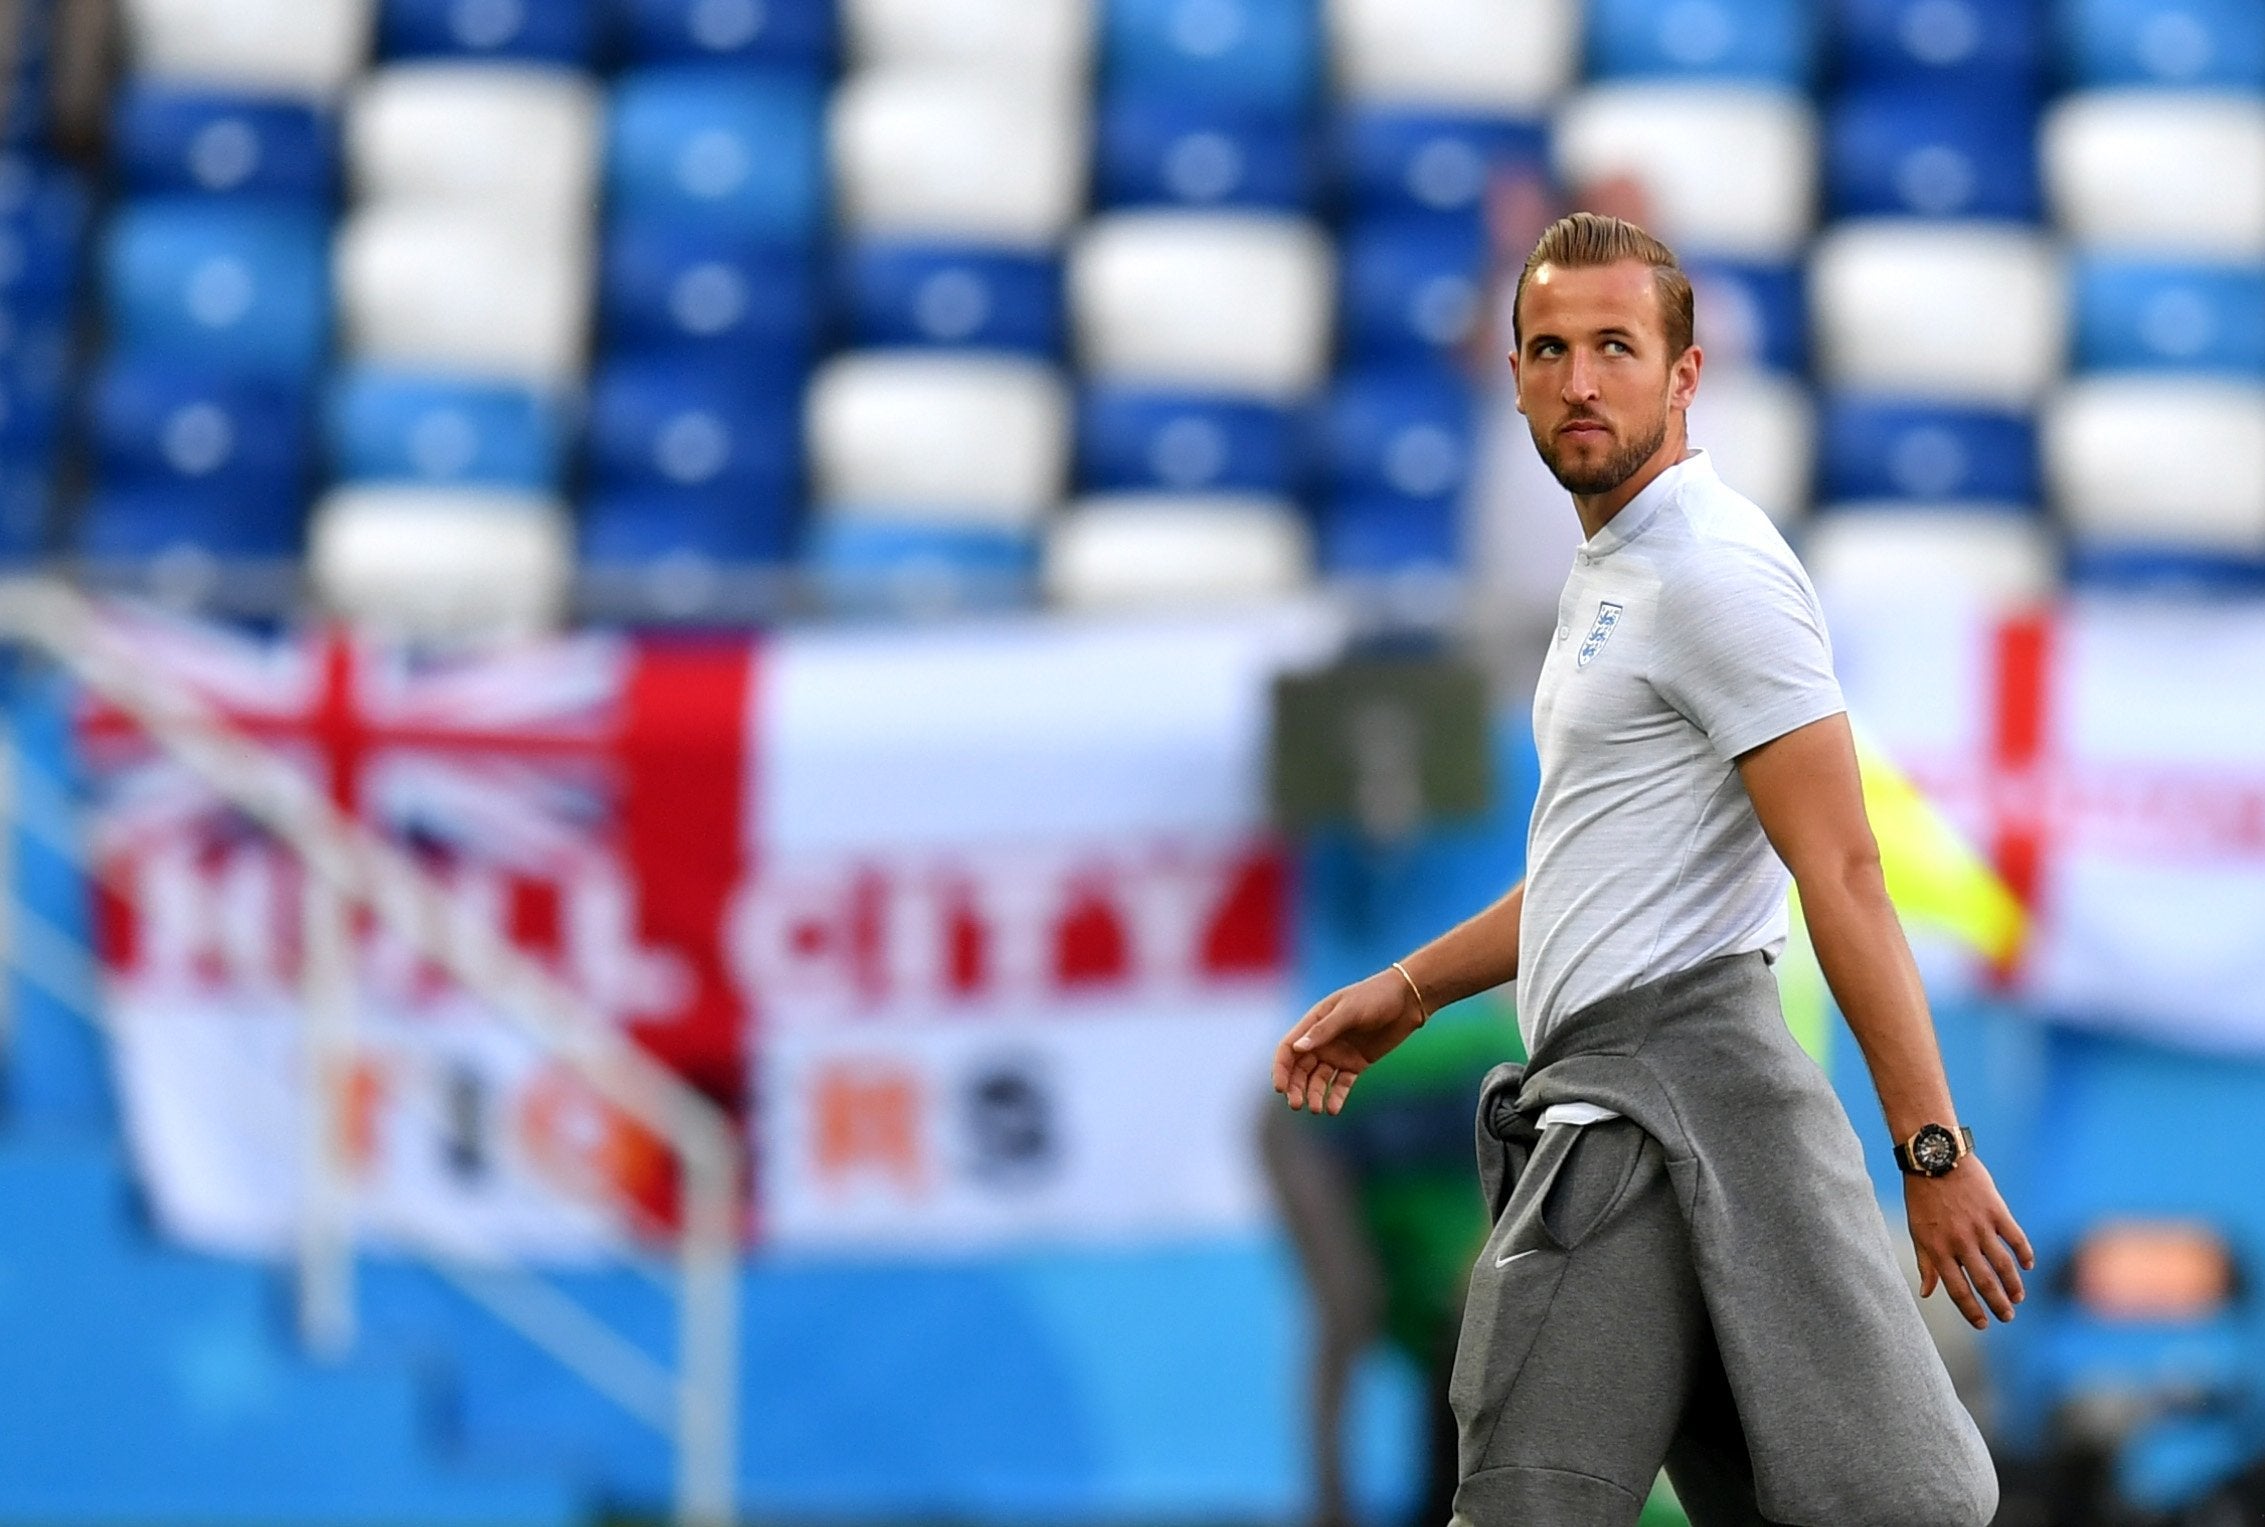 Kane will be itching to get back out on the pitch